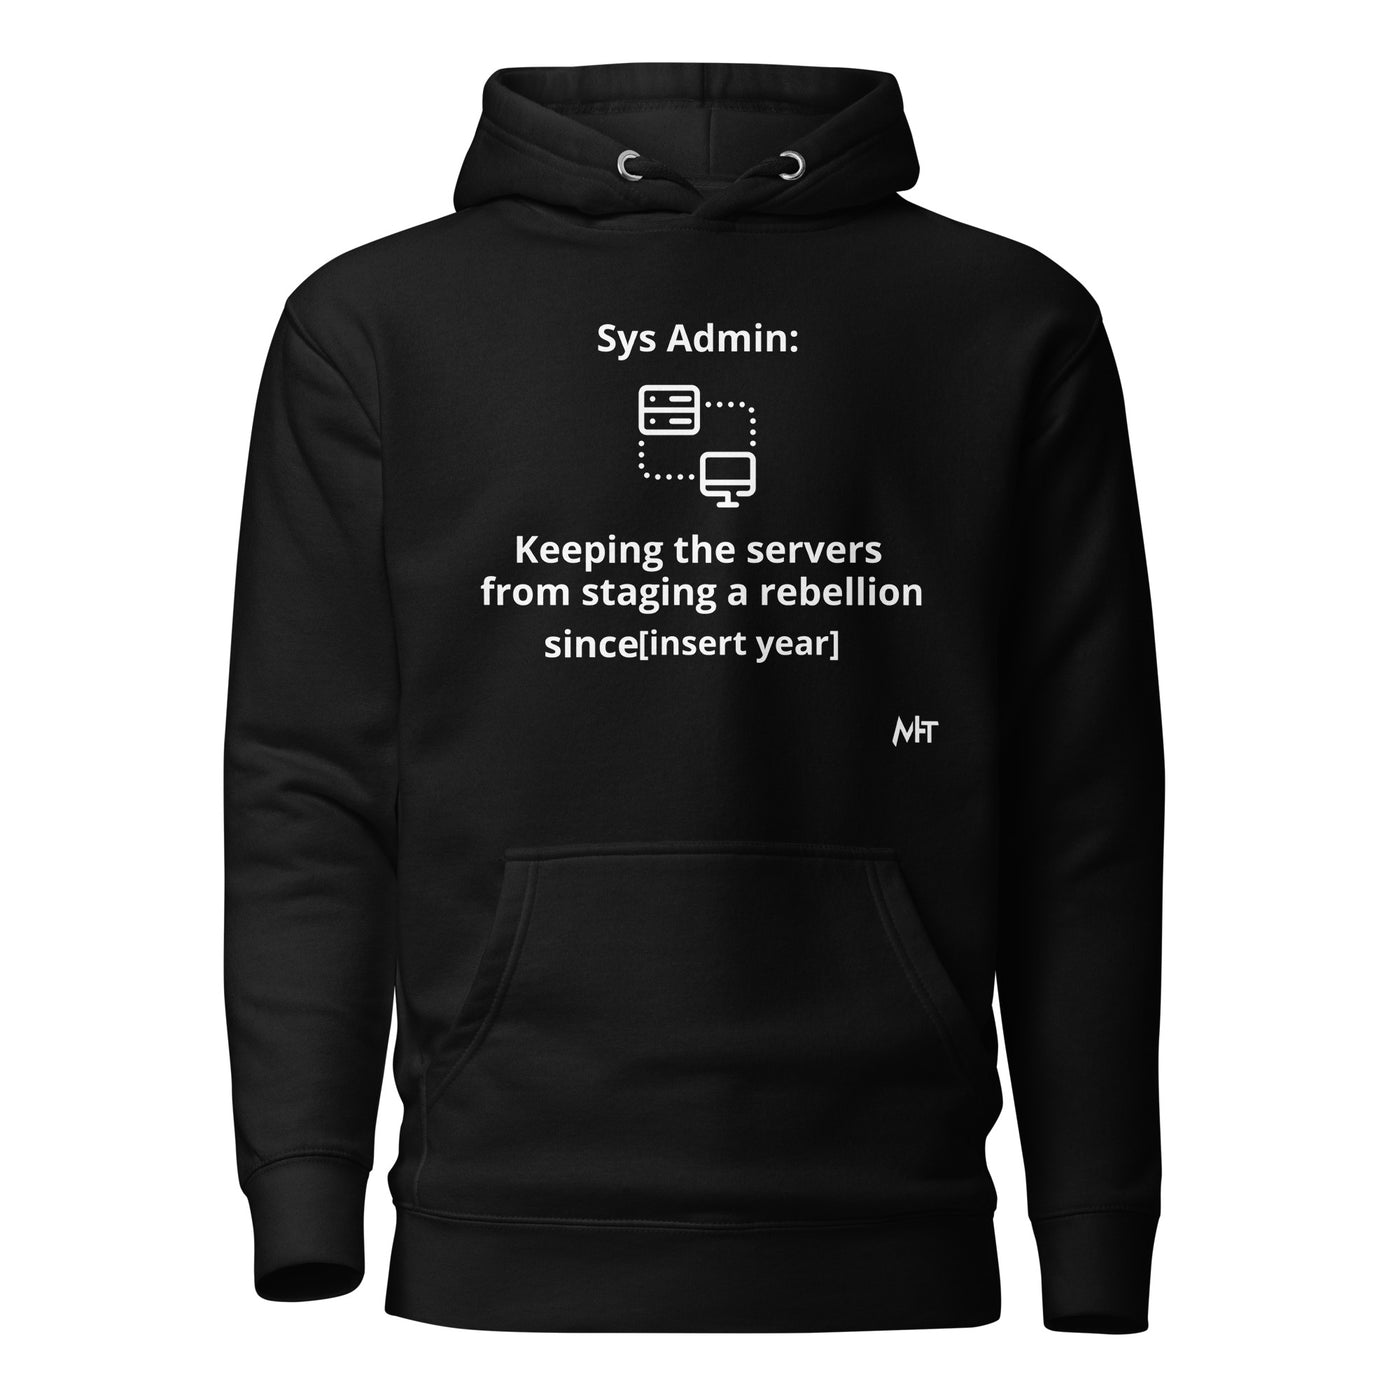 Keeping the servers from staging a rebellion since [insert year here] - Unisex Hoodie